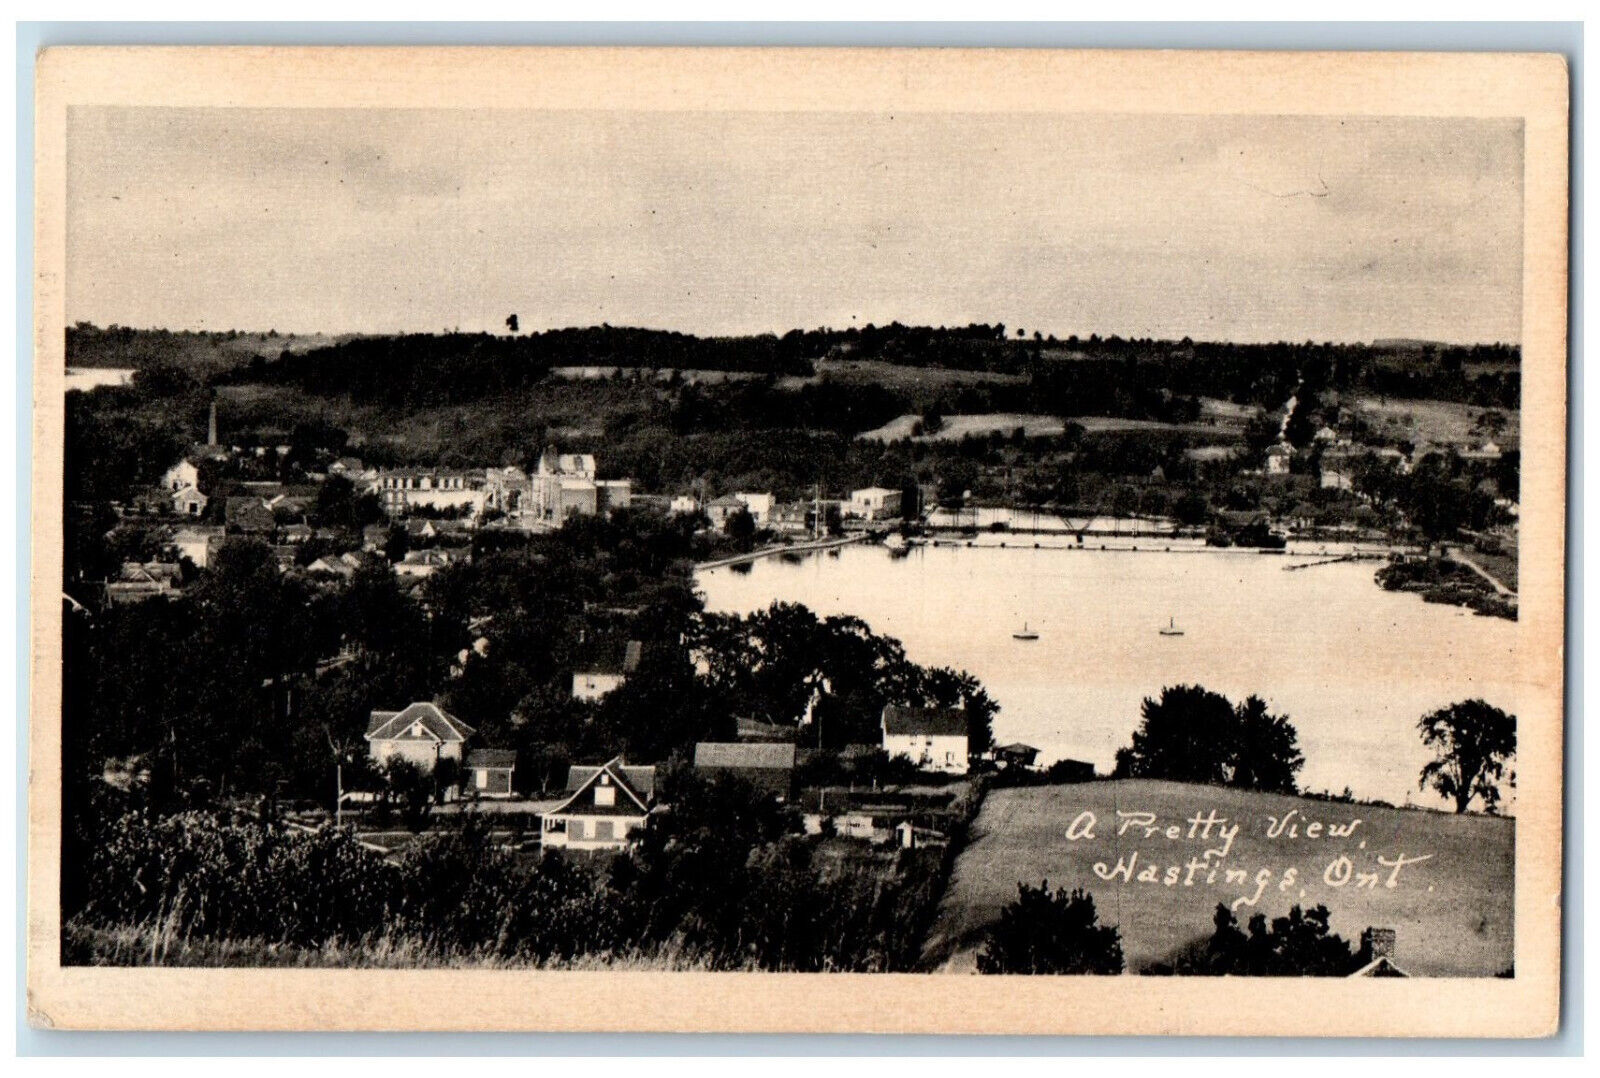 c1940's A Pretty View of Houses and Lake, Hastings Ontario Canada Postcard